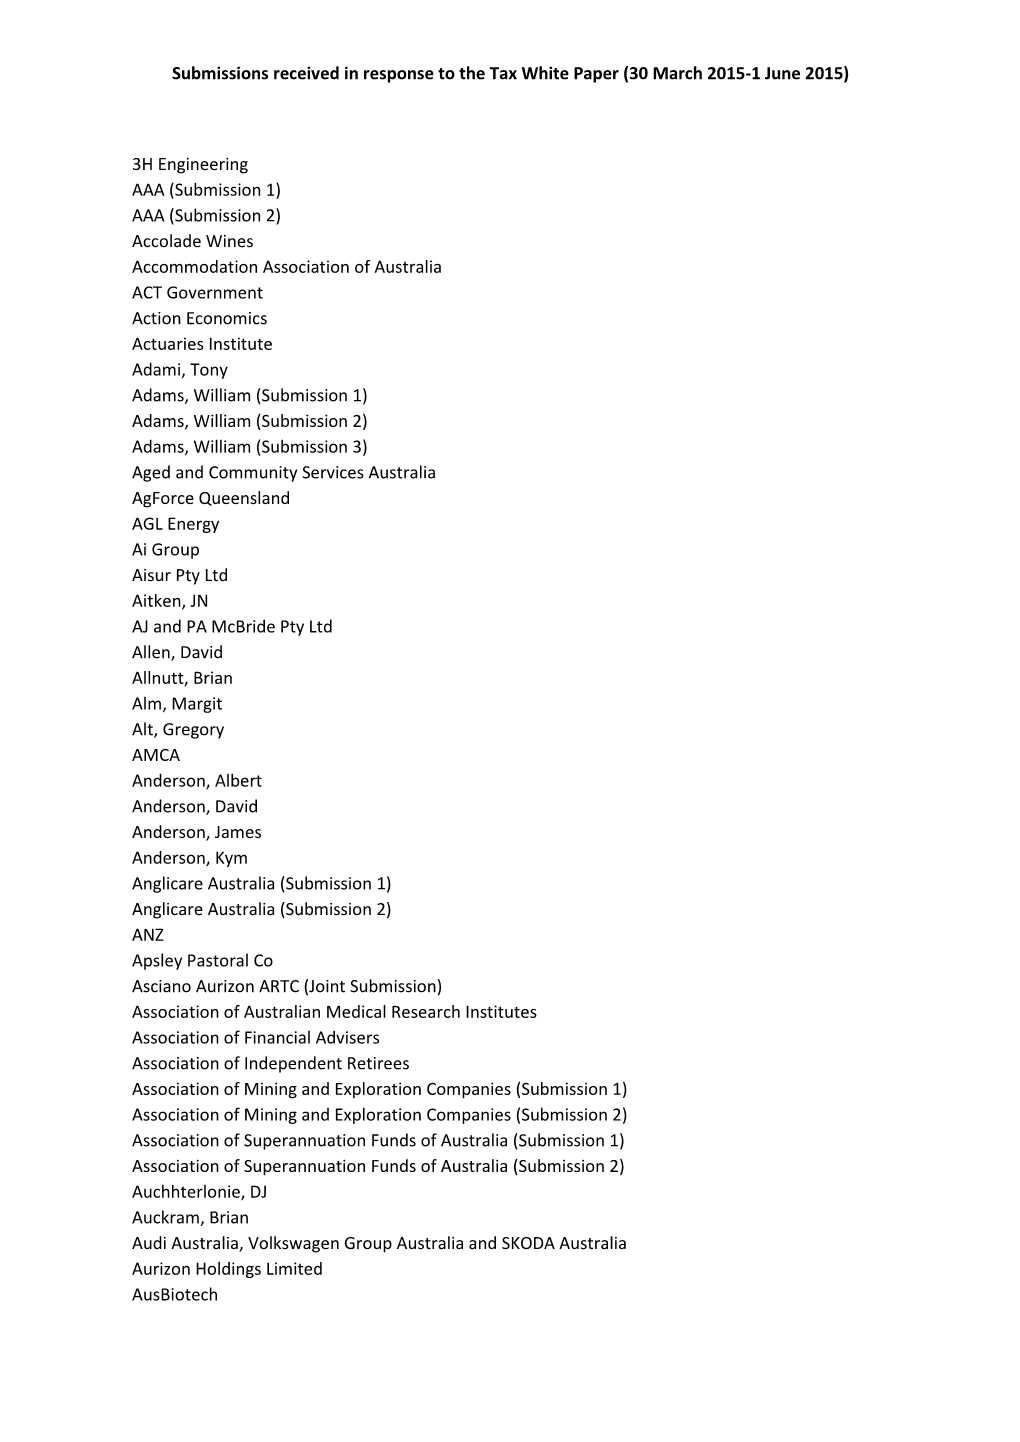 List of Submissions Received in Response to the Tax White Paper